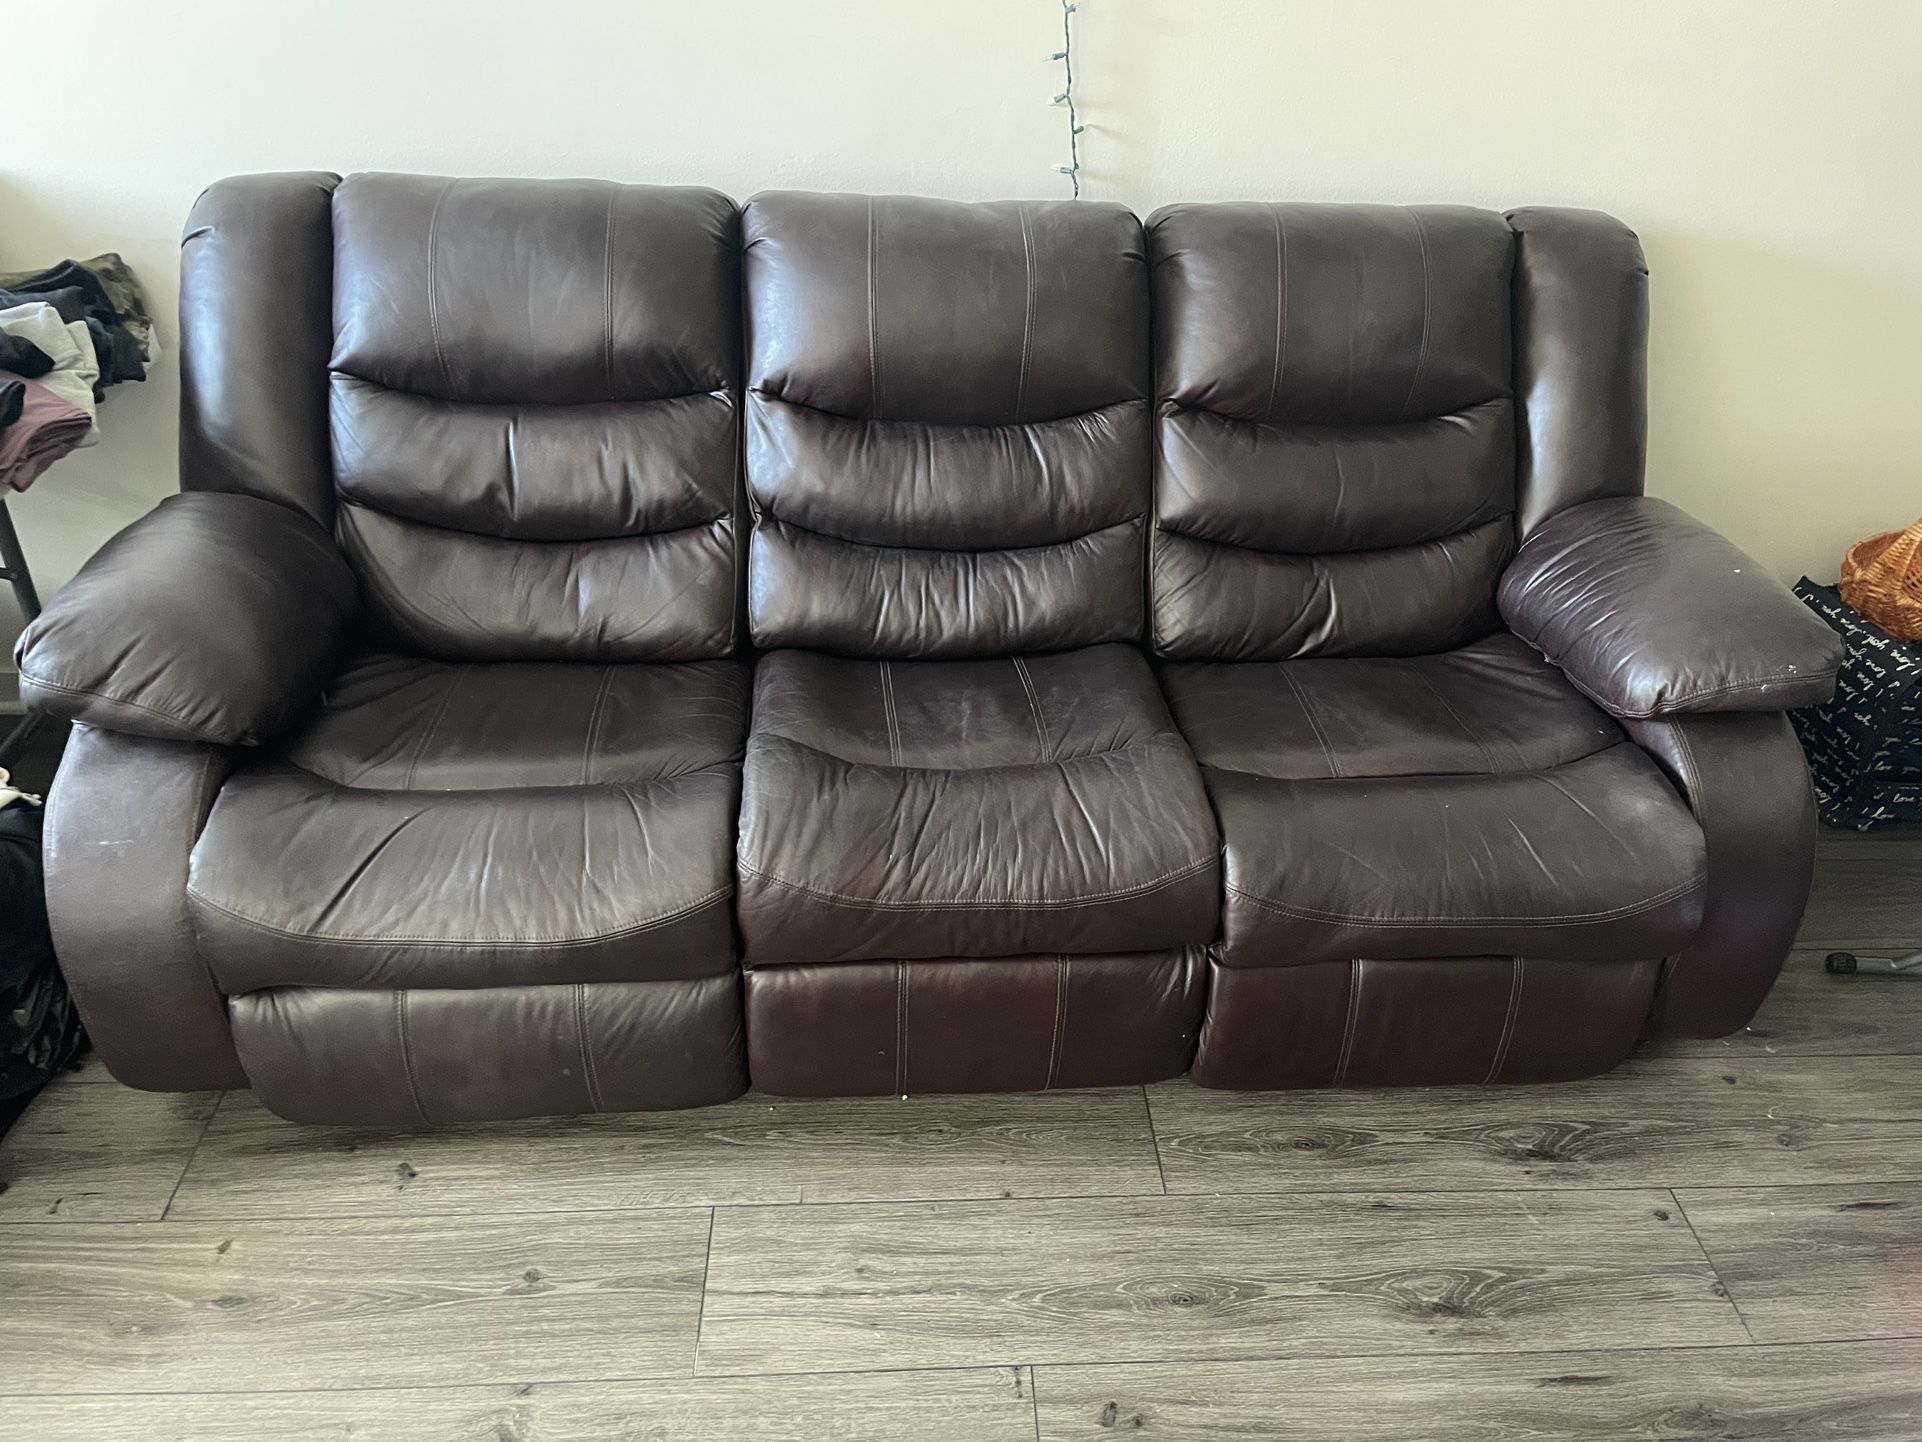 Leather Reclining Couch (Electric)